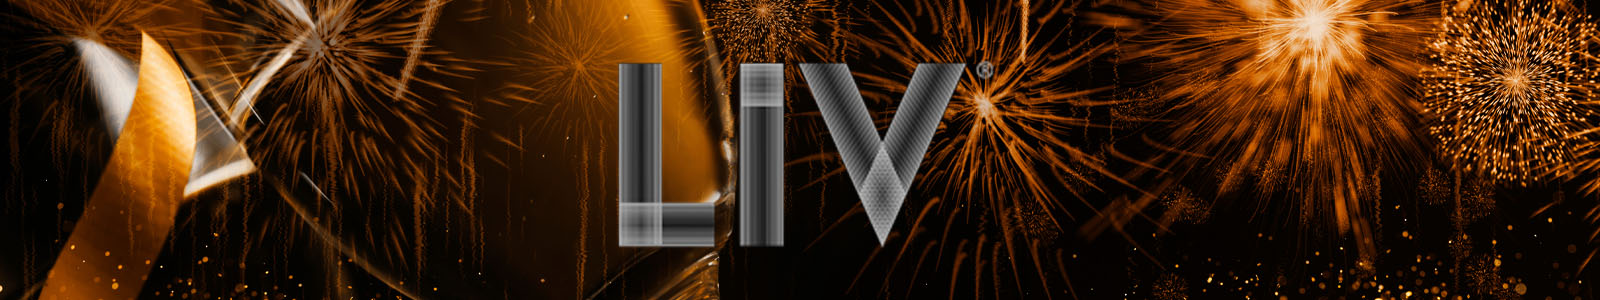 LIV Nightclub New Years EVE Table Prices